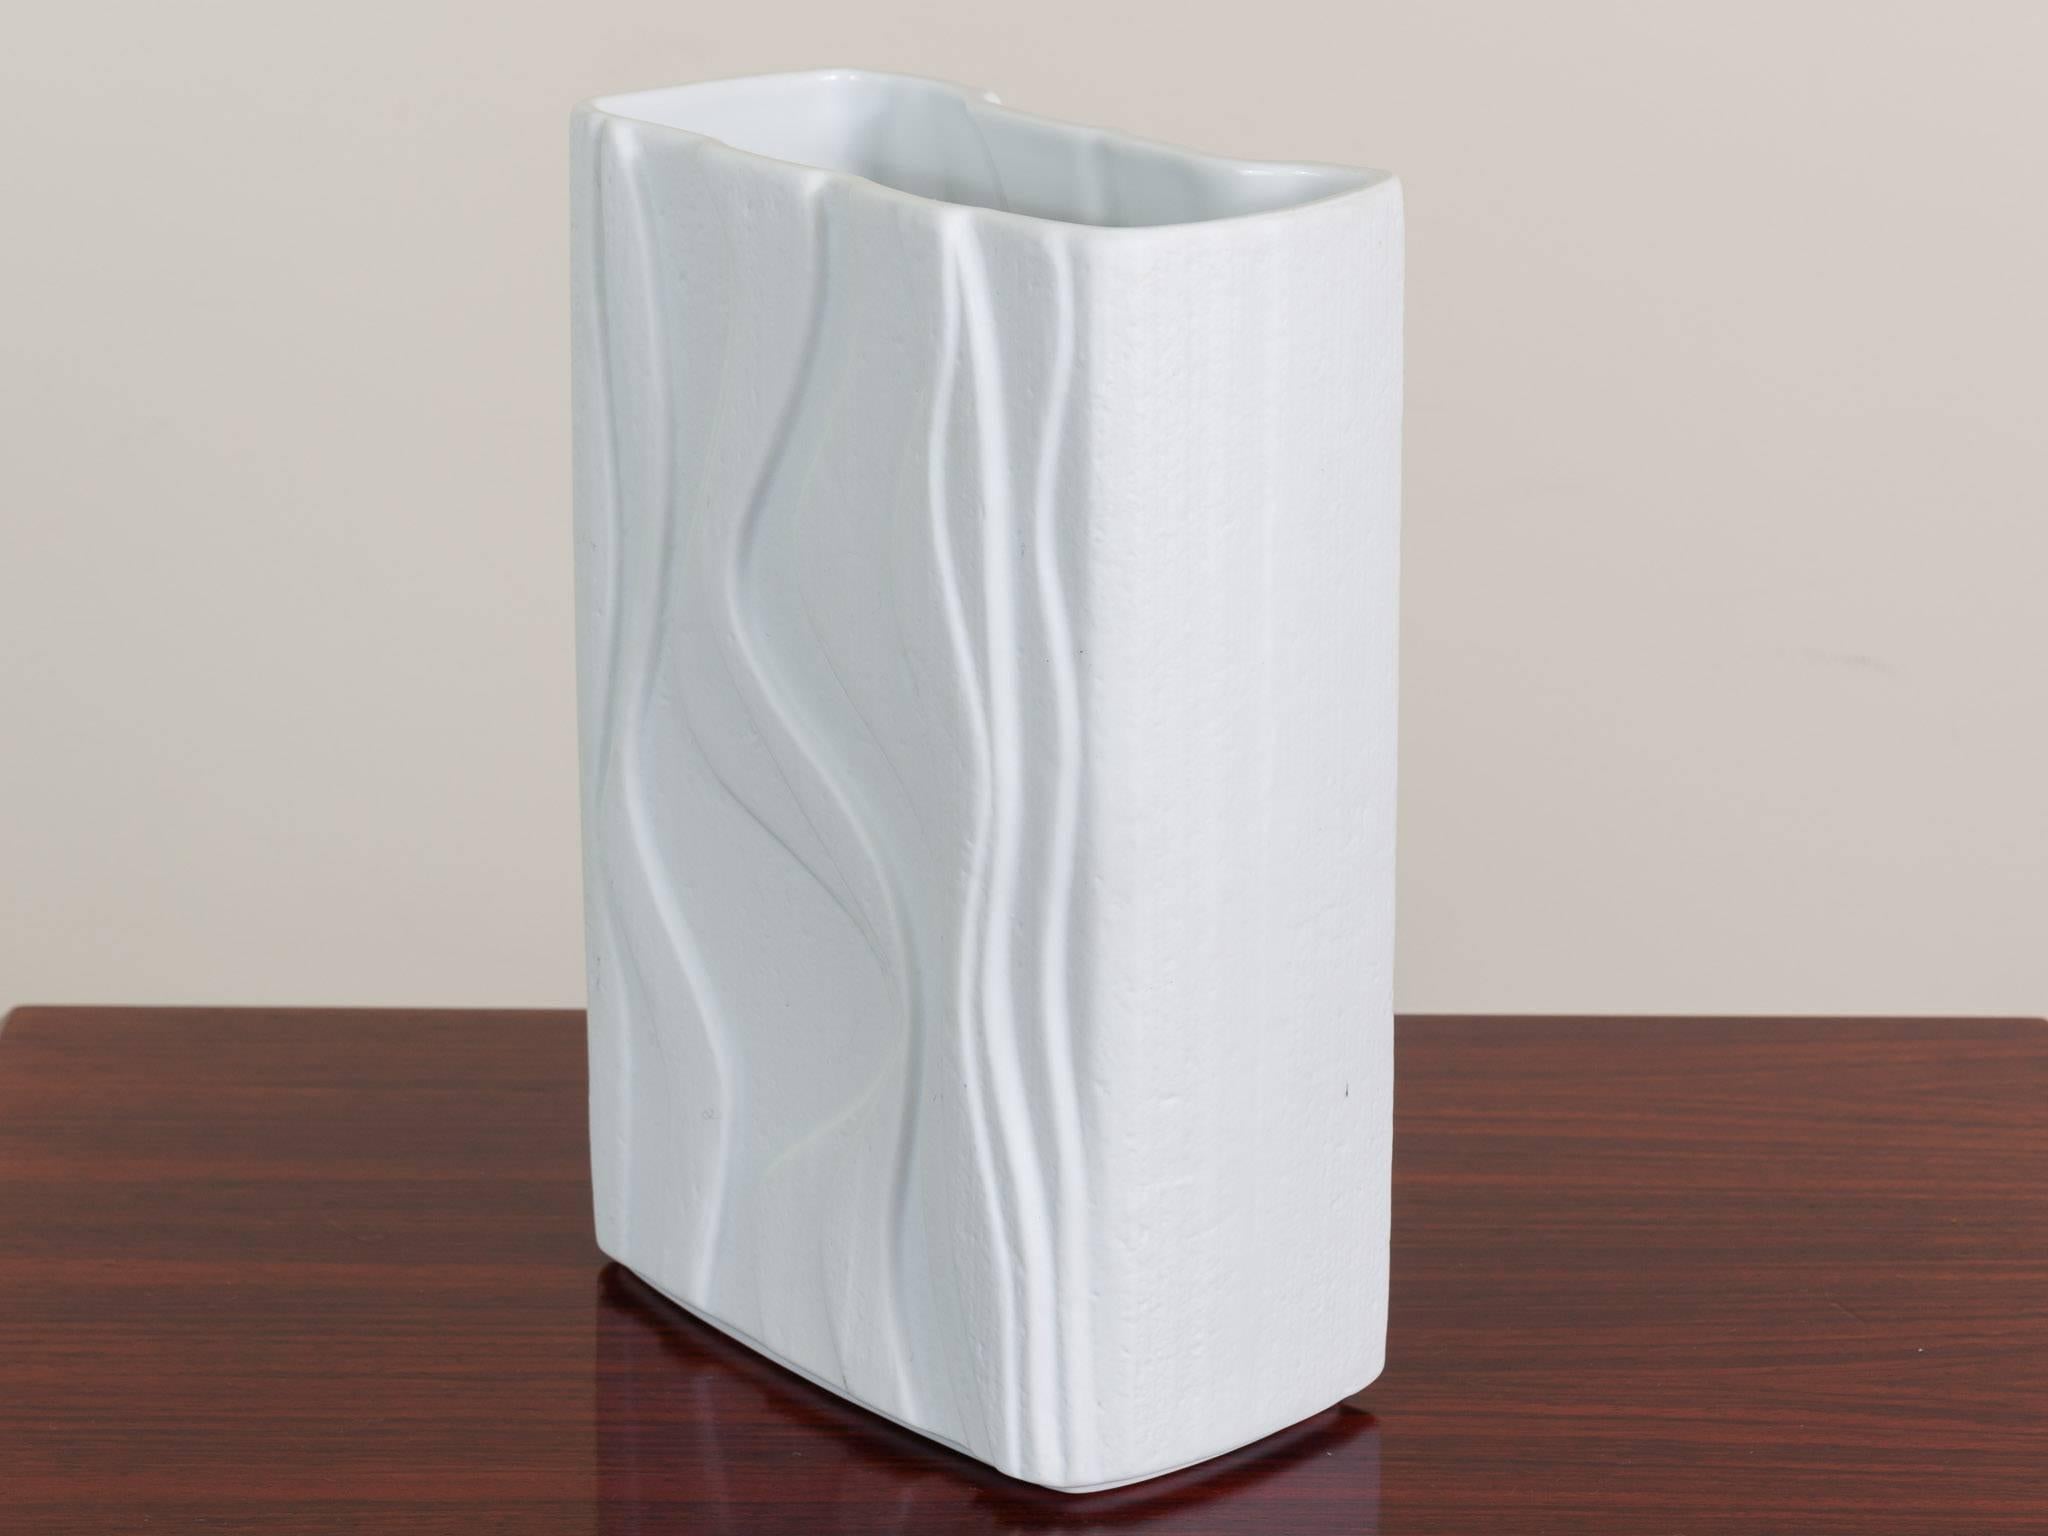 1970s 3-D raised abstract textured bisque white porcelain vase by Heinrich & Co, Selb, Bavaria, Germany. A very clever and unique design which gives the illusion that water has run down it to create the pattern that would be left on the beach in